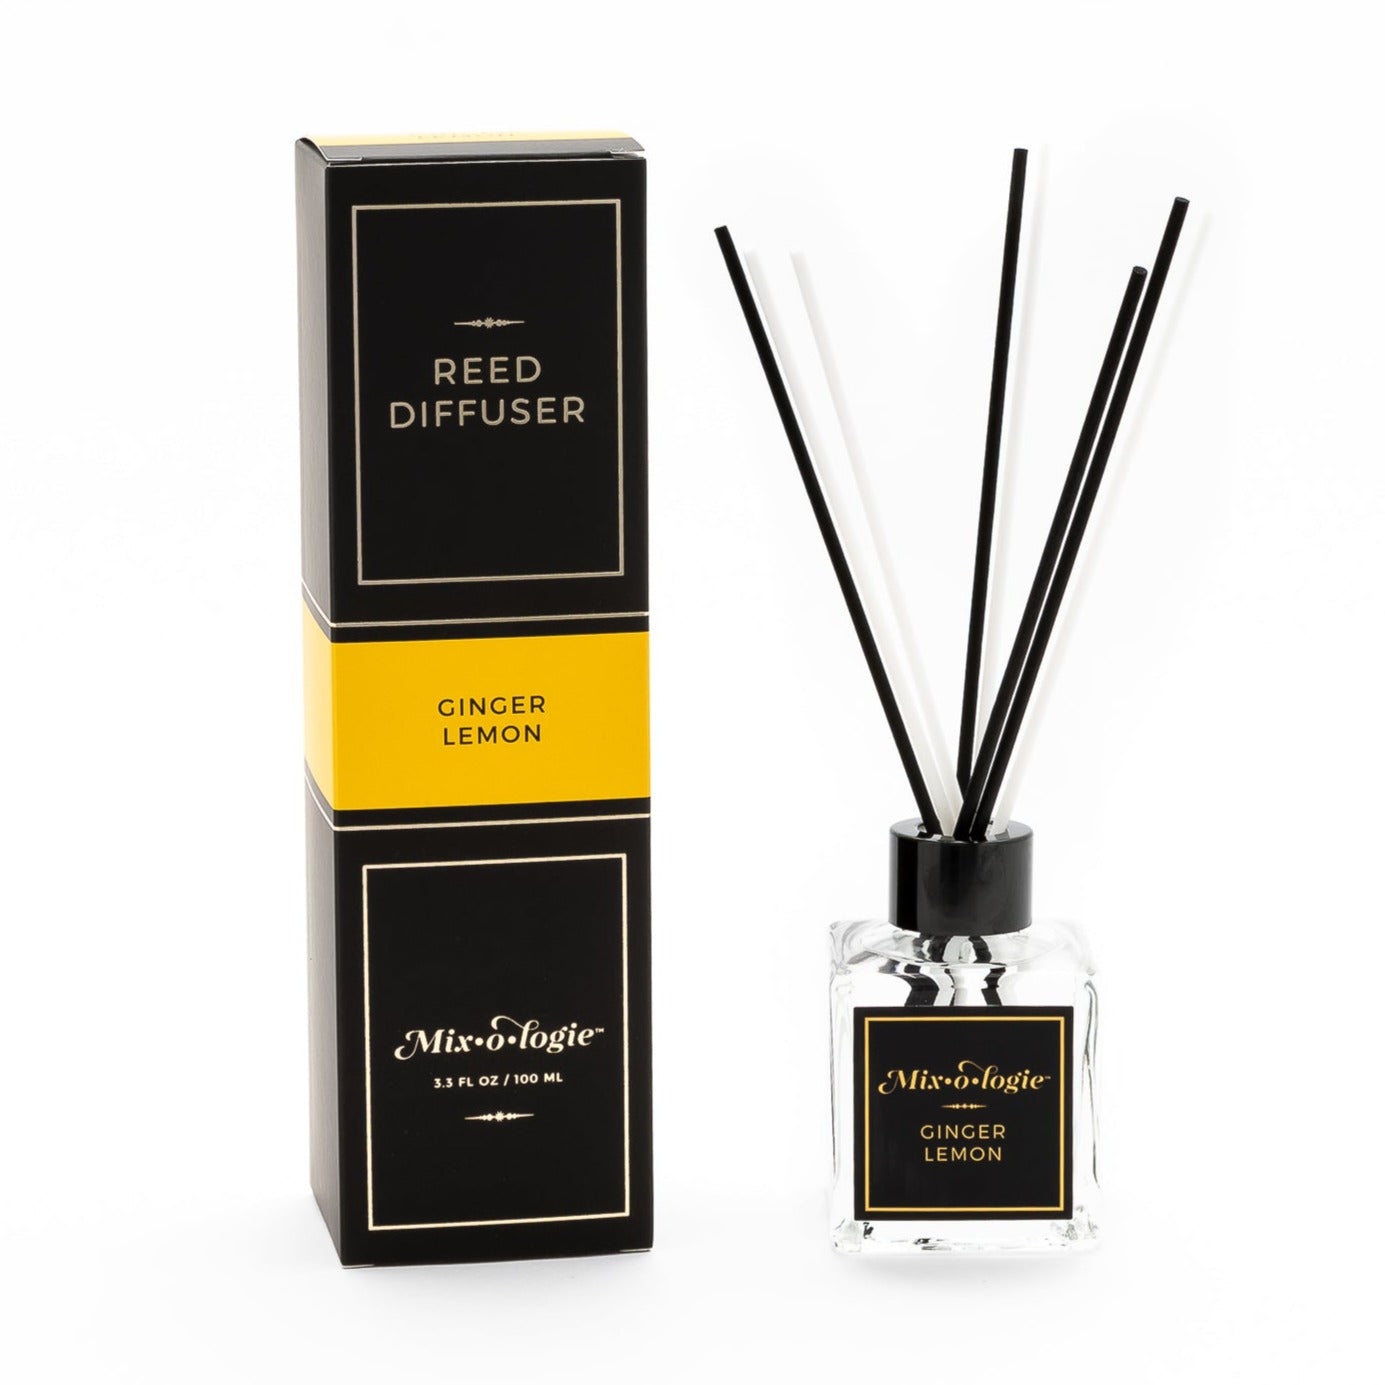 Ginger Lemon Reed Diffuser is a clear square glass container with black label that says Mixologie – Ginger Lemon. Has a black top and 4 white & 4 black reed sticks coming out of top, is 3.3 fl oz or 100 mL of clear scented liquid. Black rectangle package box with mustard label. Box and diffuser are pictured with white background.